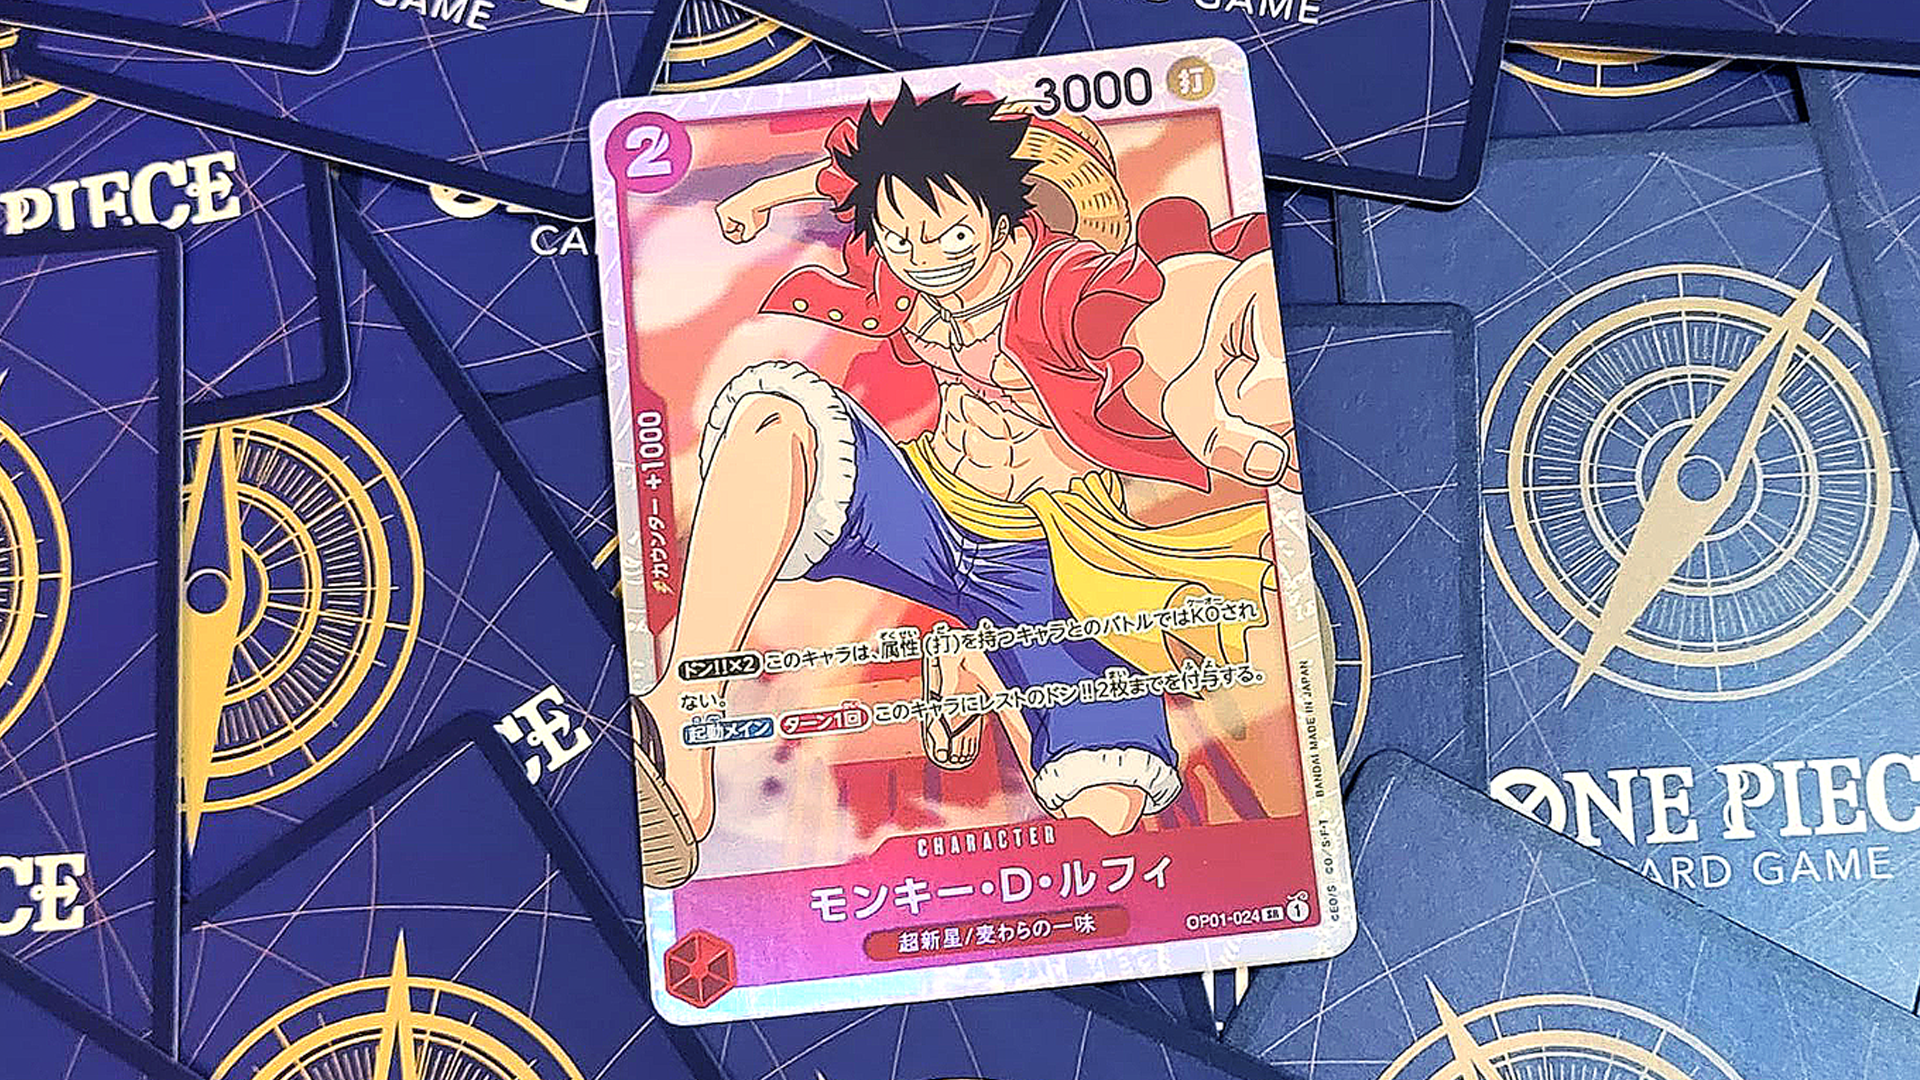 ONE PIECE CARD GAME Premium Card Collection -25th Edition- | ONE PIECE |  PREMIUM BANDAI USA Online Store for Action Figures, Model Kits, Toys and  more